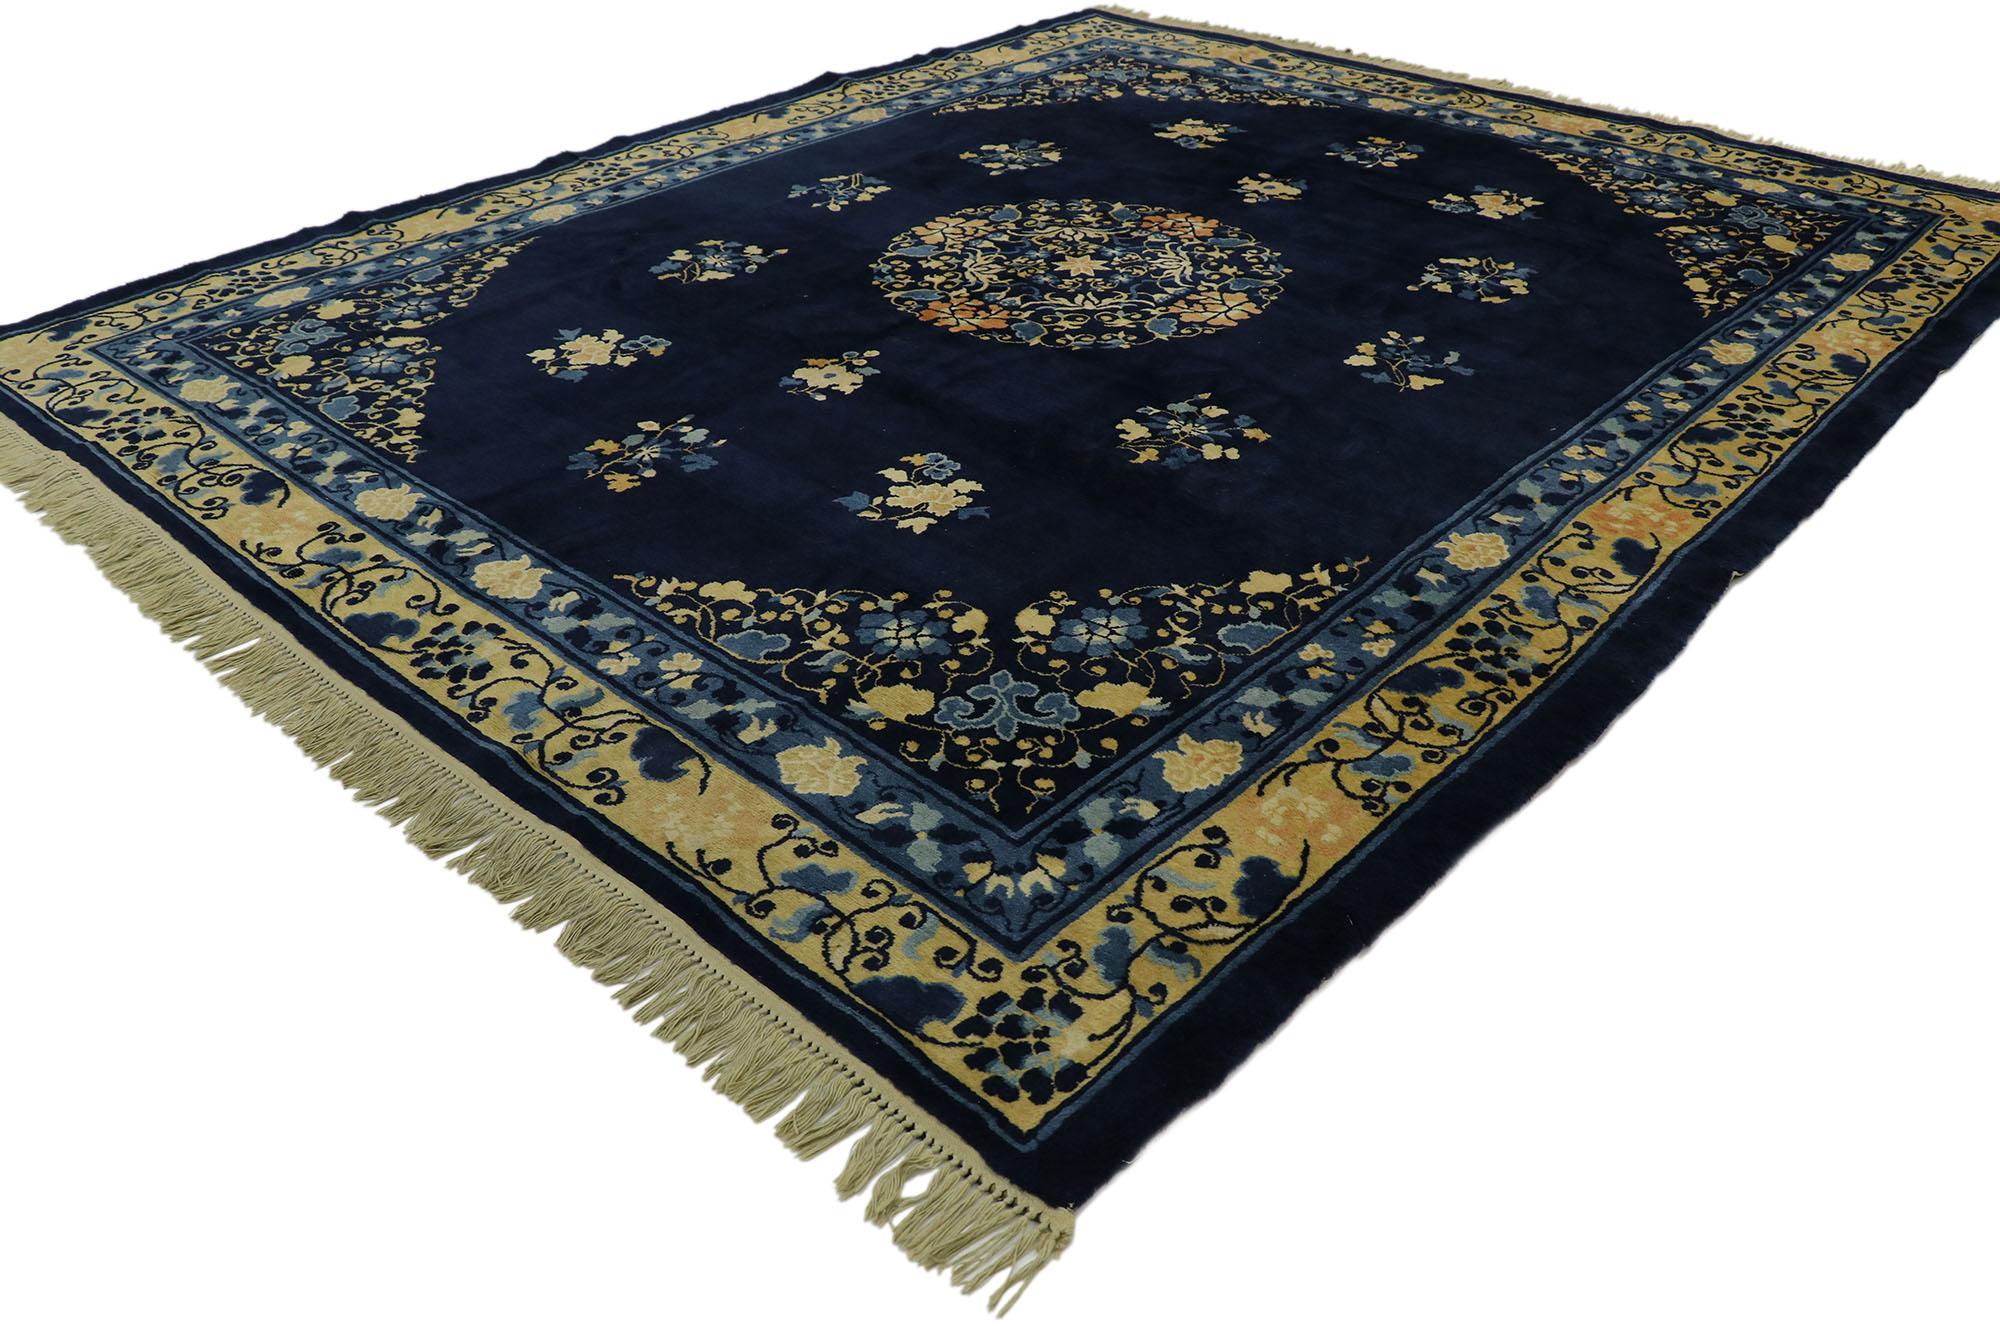 77542 Antique Chinese Peking rug with Traditional Chinoiserie style. This hand knotted wool antique Chinese Peking rug features a rounded open center medallion decorated with a swirl of peonies, lotuses, and leafy tendrils floating in the center of